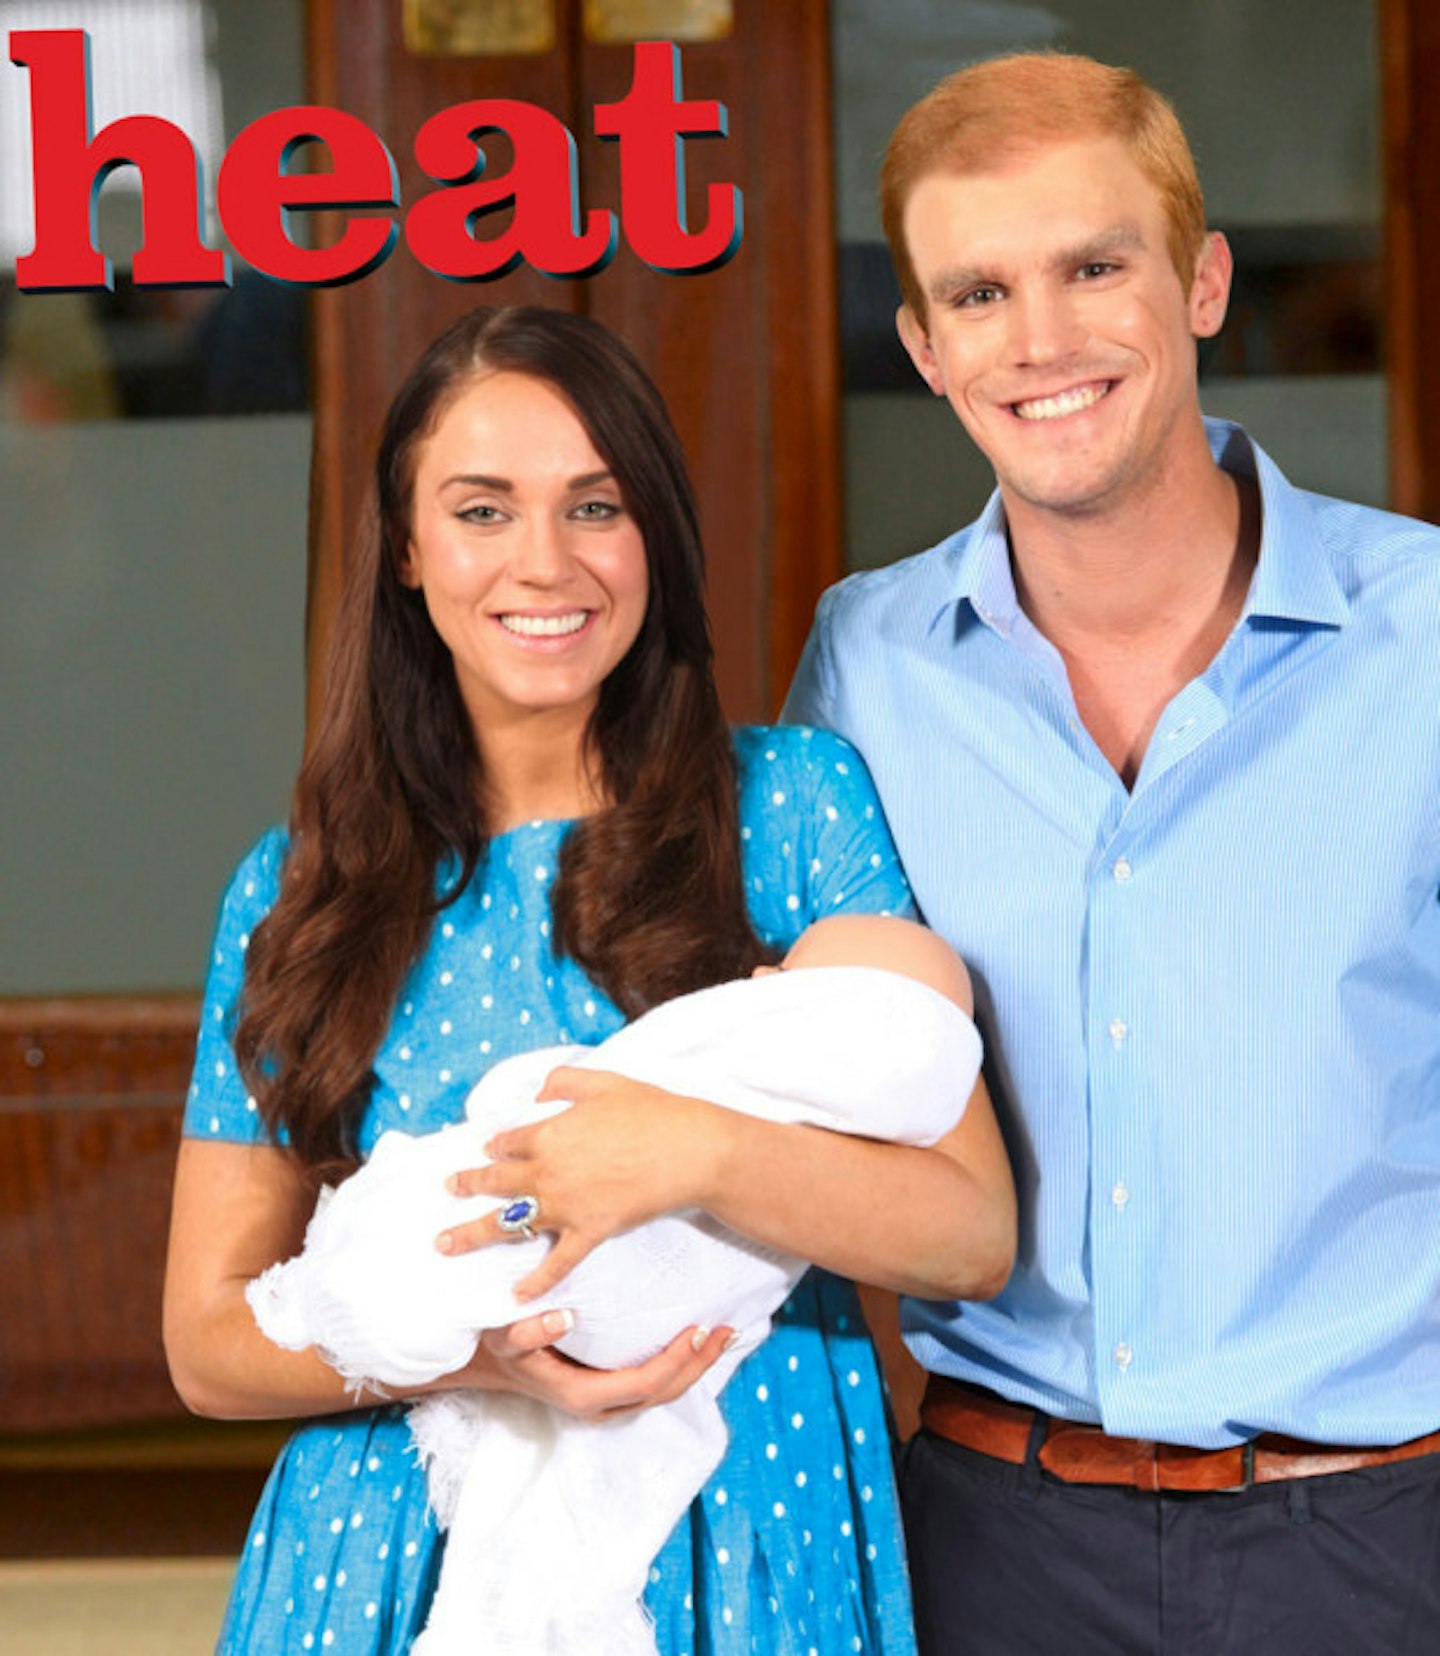 Vicky Pattison and Gaz Beadle as Kate and Wills